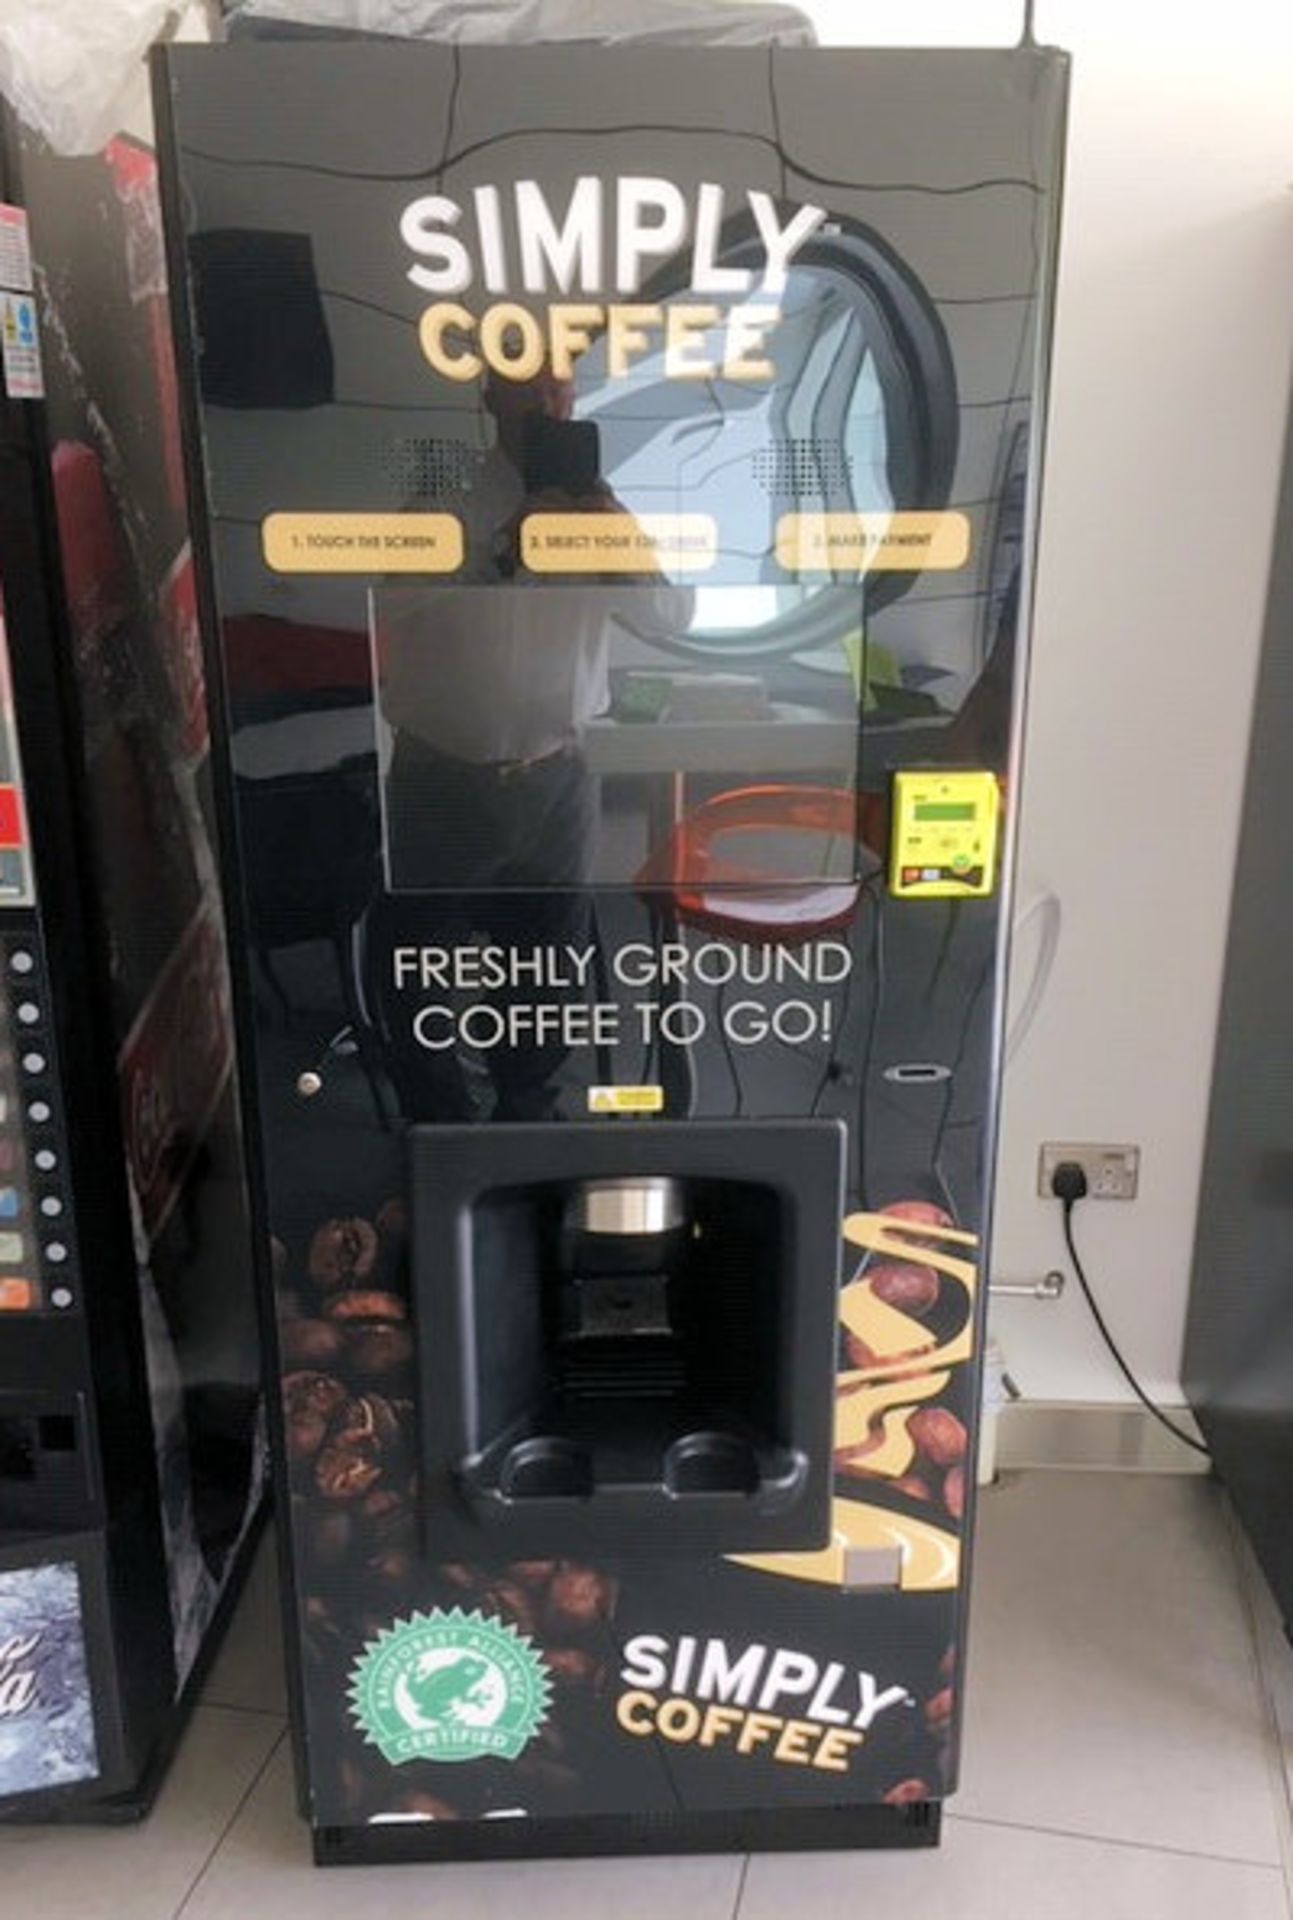 1 x Sigma Touch Touchscreen Coffee Vending Machine with MEI CF7000 Change Manager - CL393 - Ref: SG - Image 6 of 7